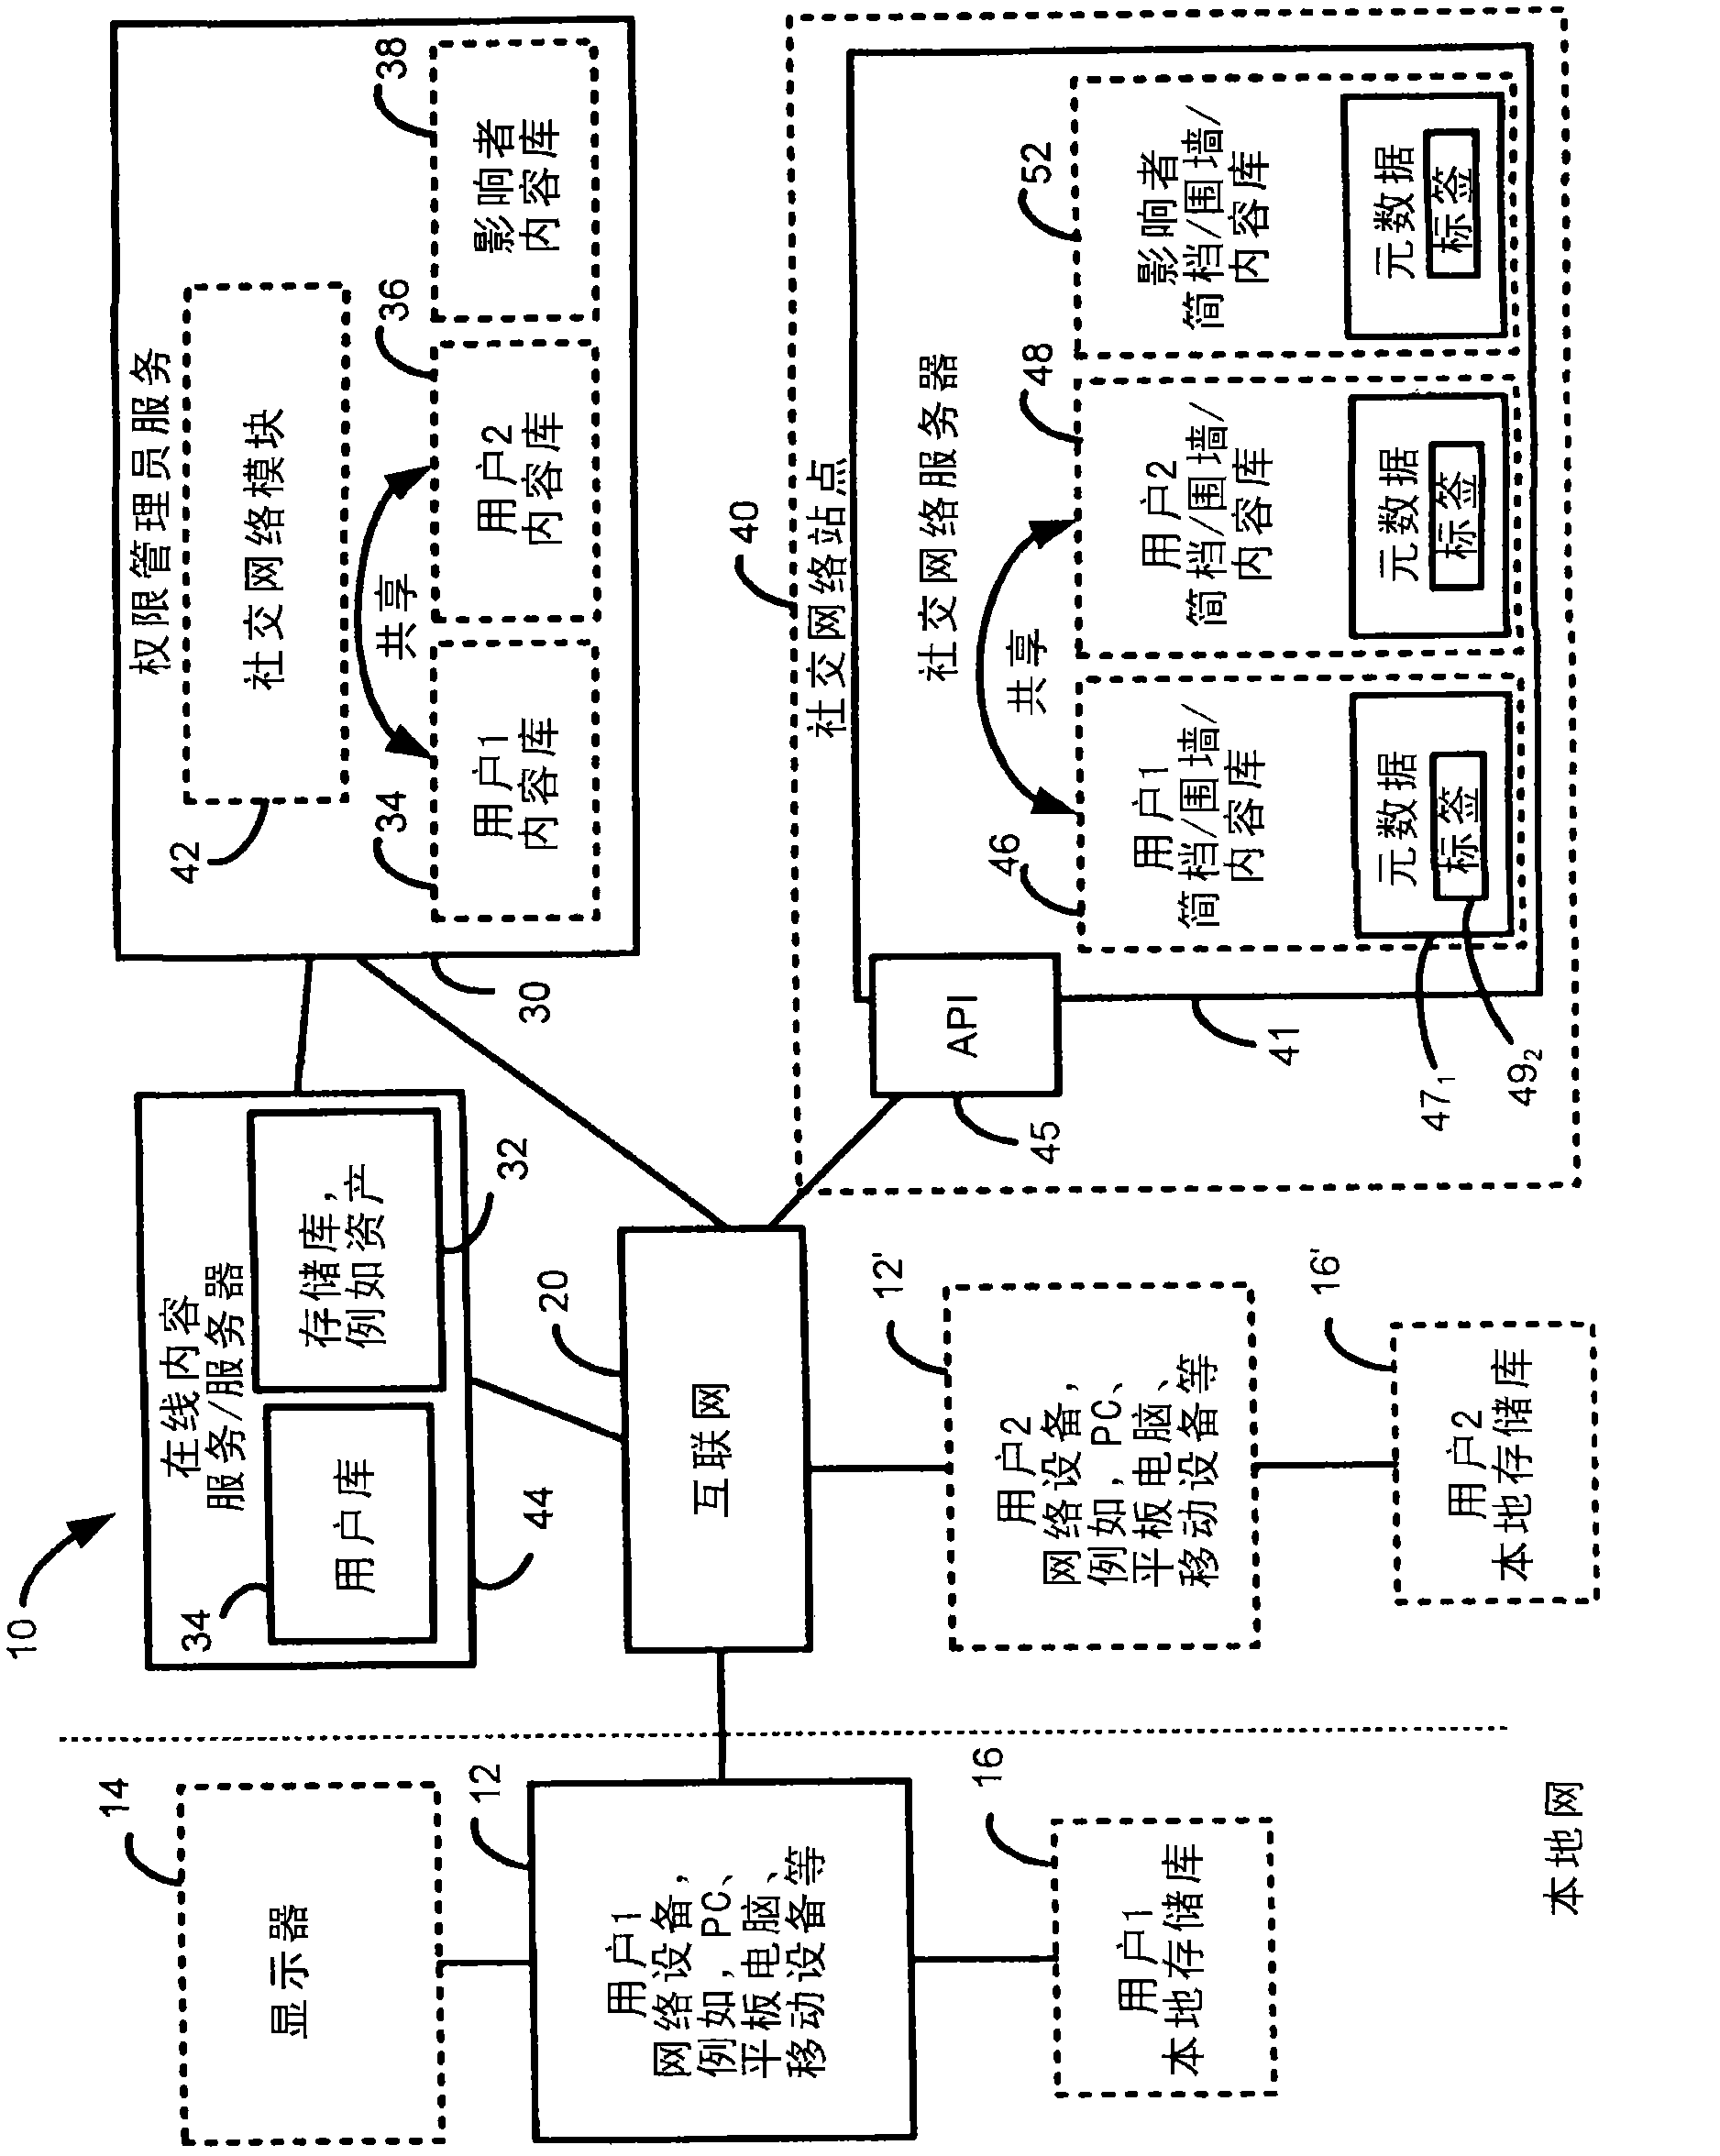 System and method for social interaction about content items such as movies